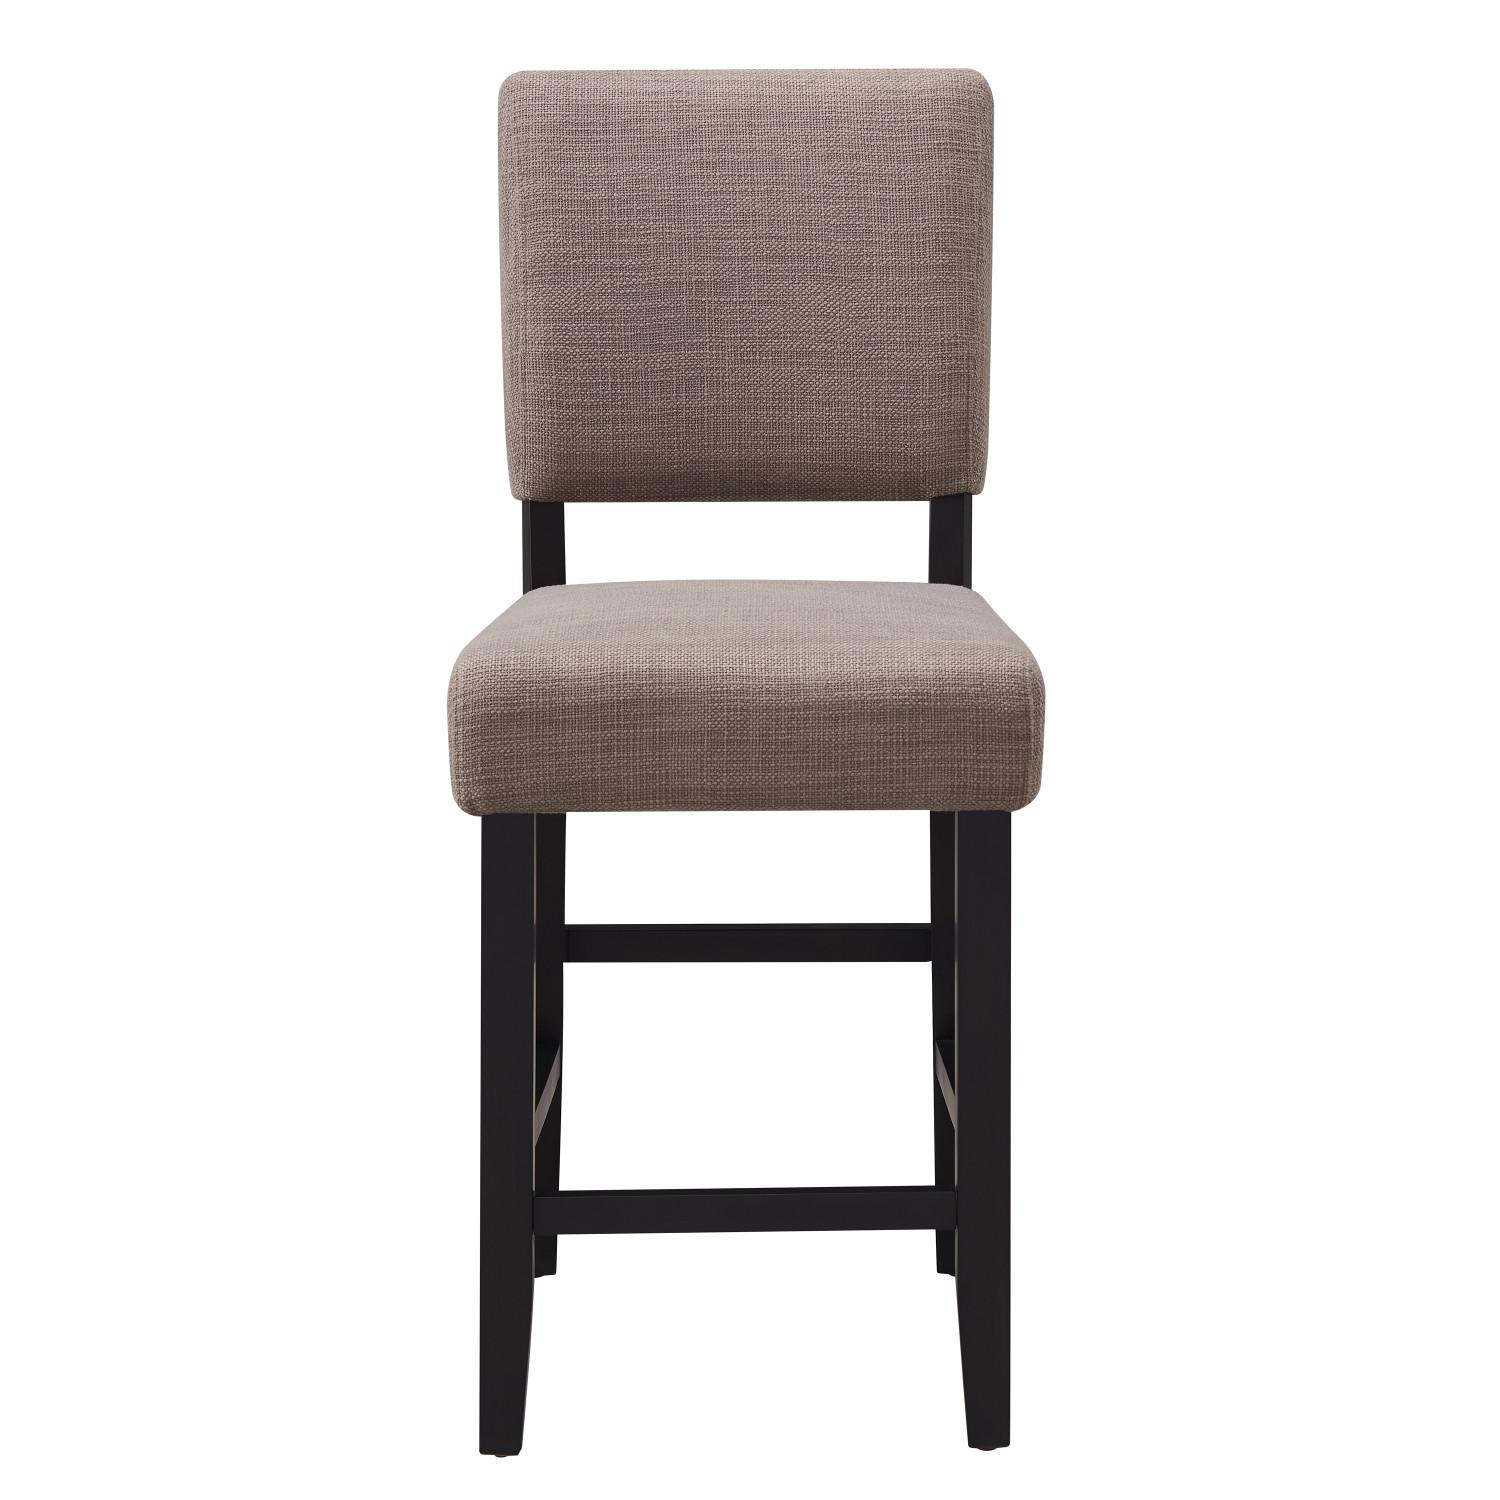 Leick Home 10086-BLKGL Counter Stool in Black and Gray Set of 2 New